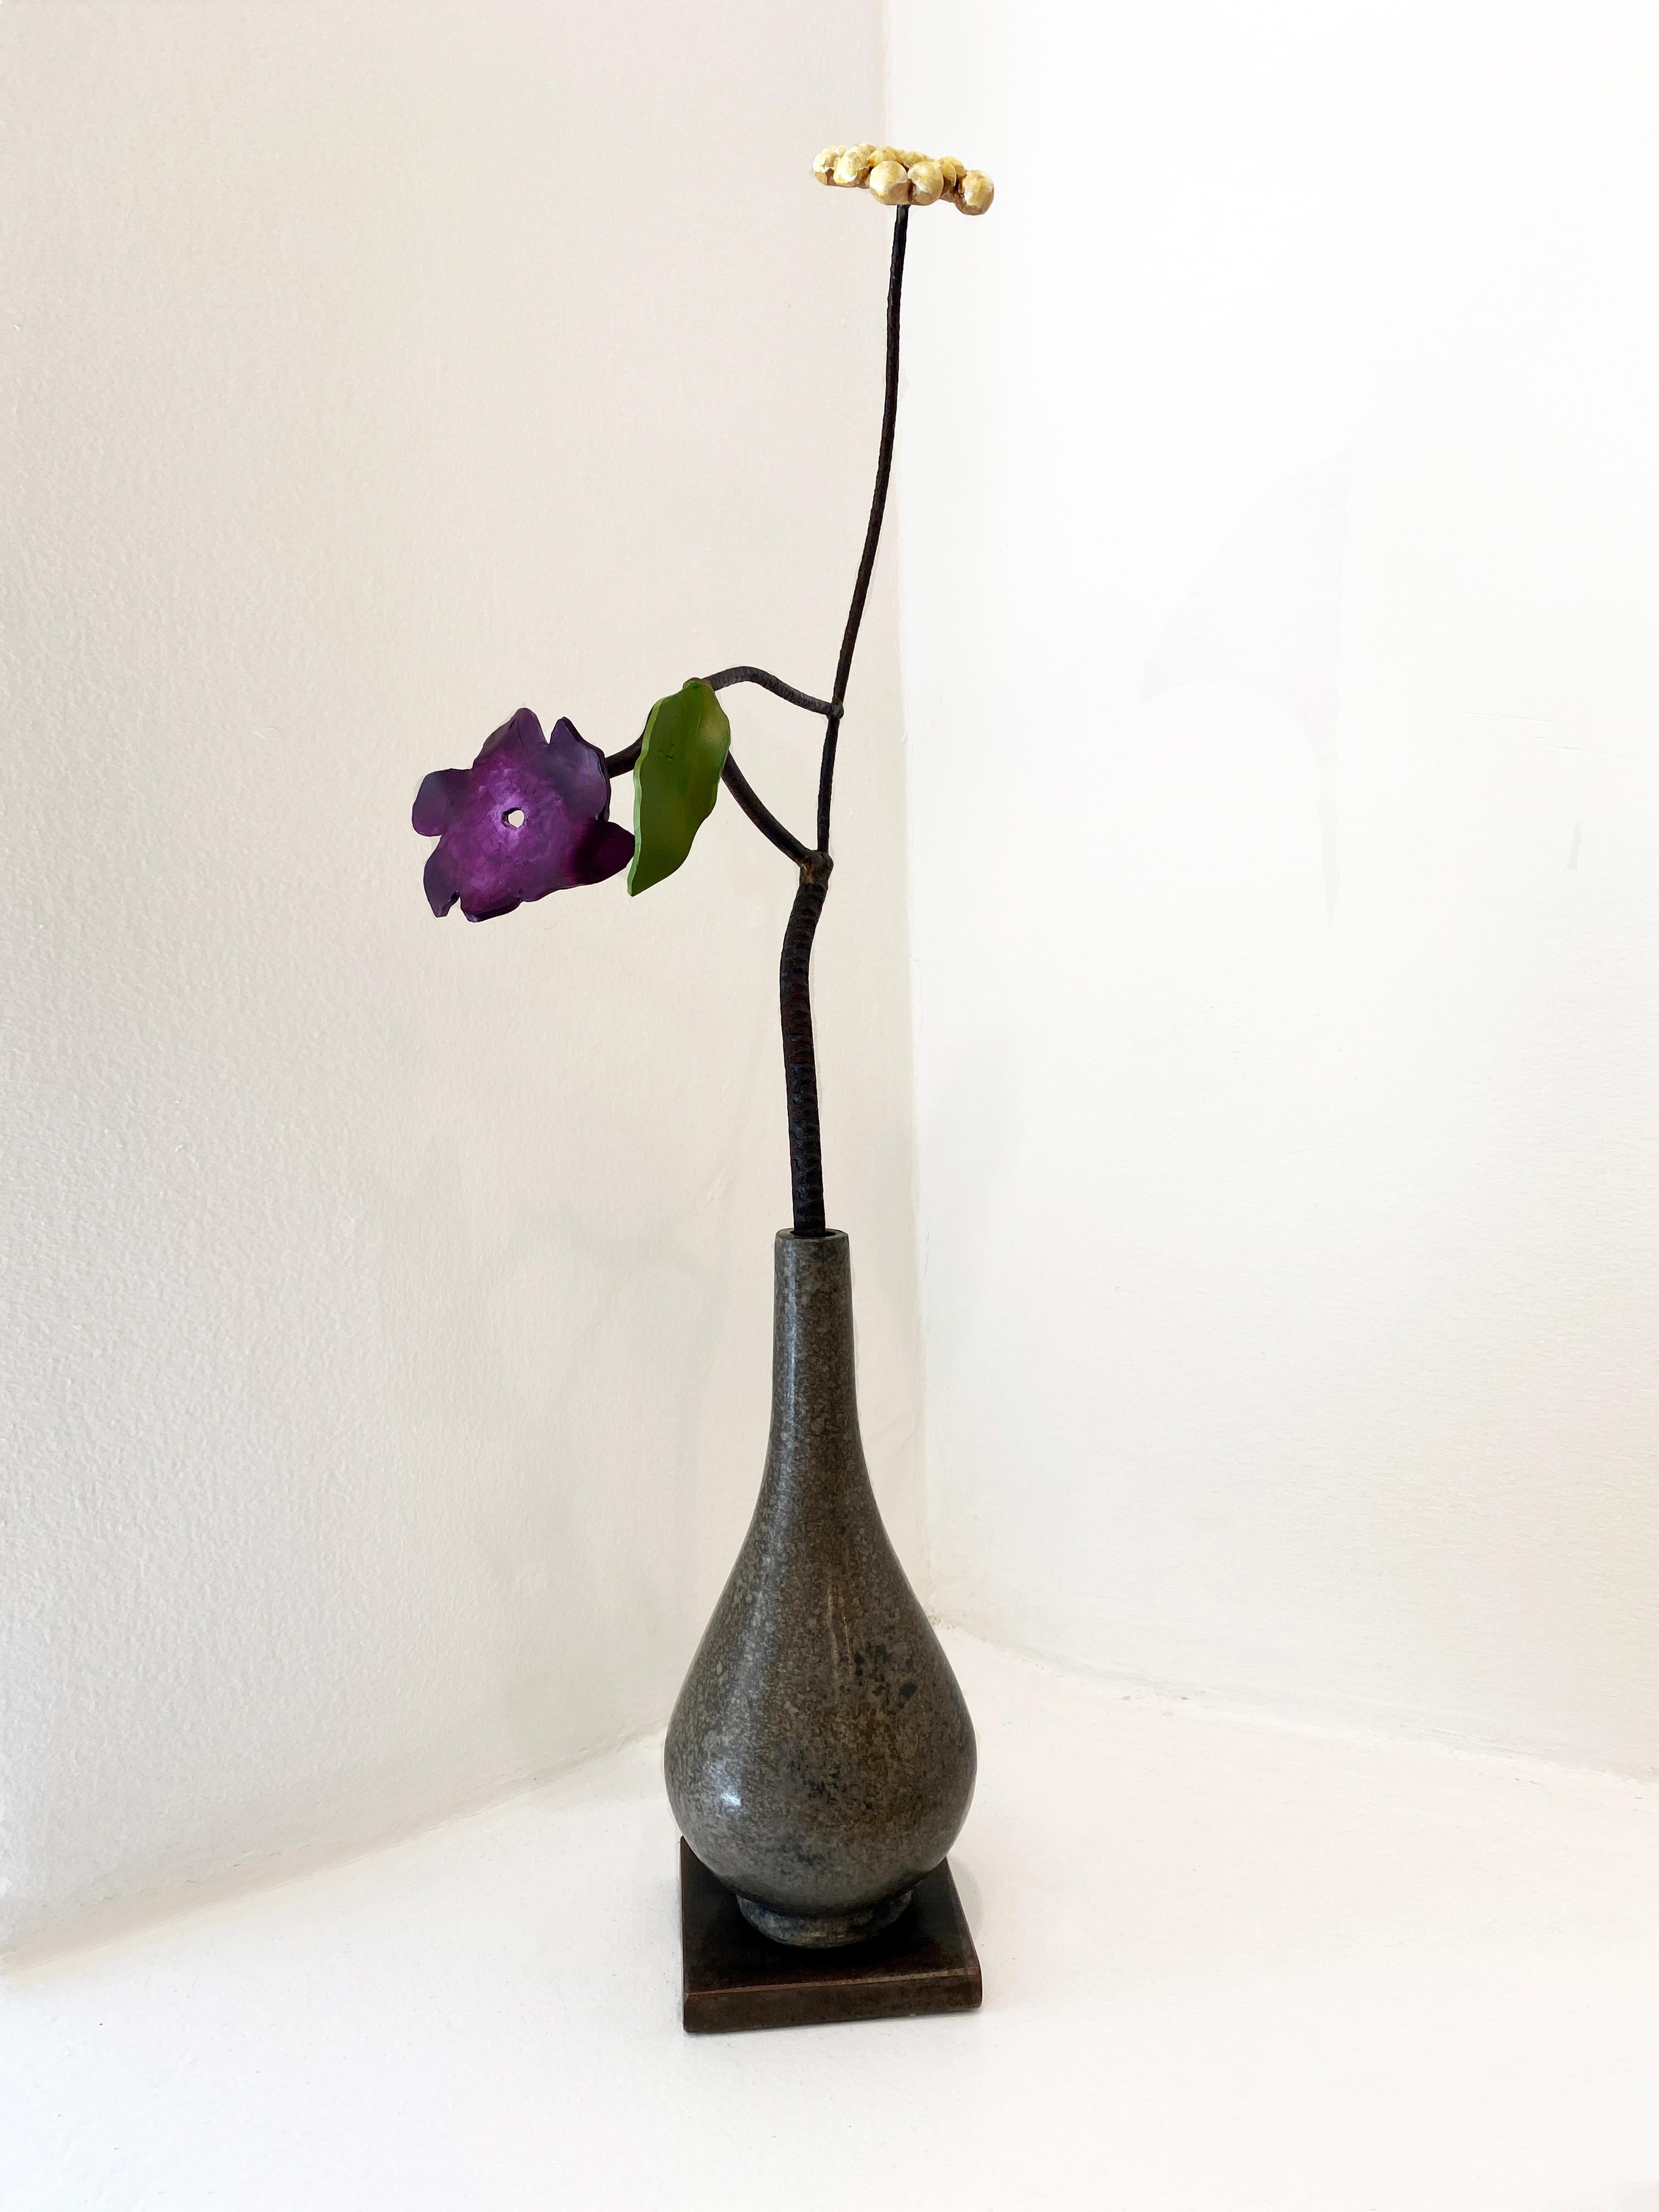 Available at Madelyn Jordon Fine Art. 'Silver Water Bottle with Flower and Yarrow' by David Kimball Anderson, 2023. Bronze, steel, and paint, 27 x 8 x 8 in. This sculpture features a rounded vase cast in bronze and finished with a gray patina. It